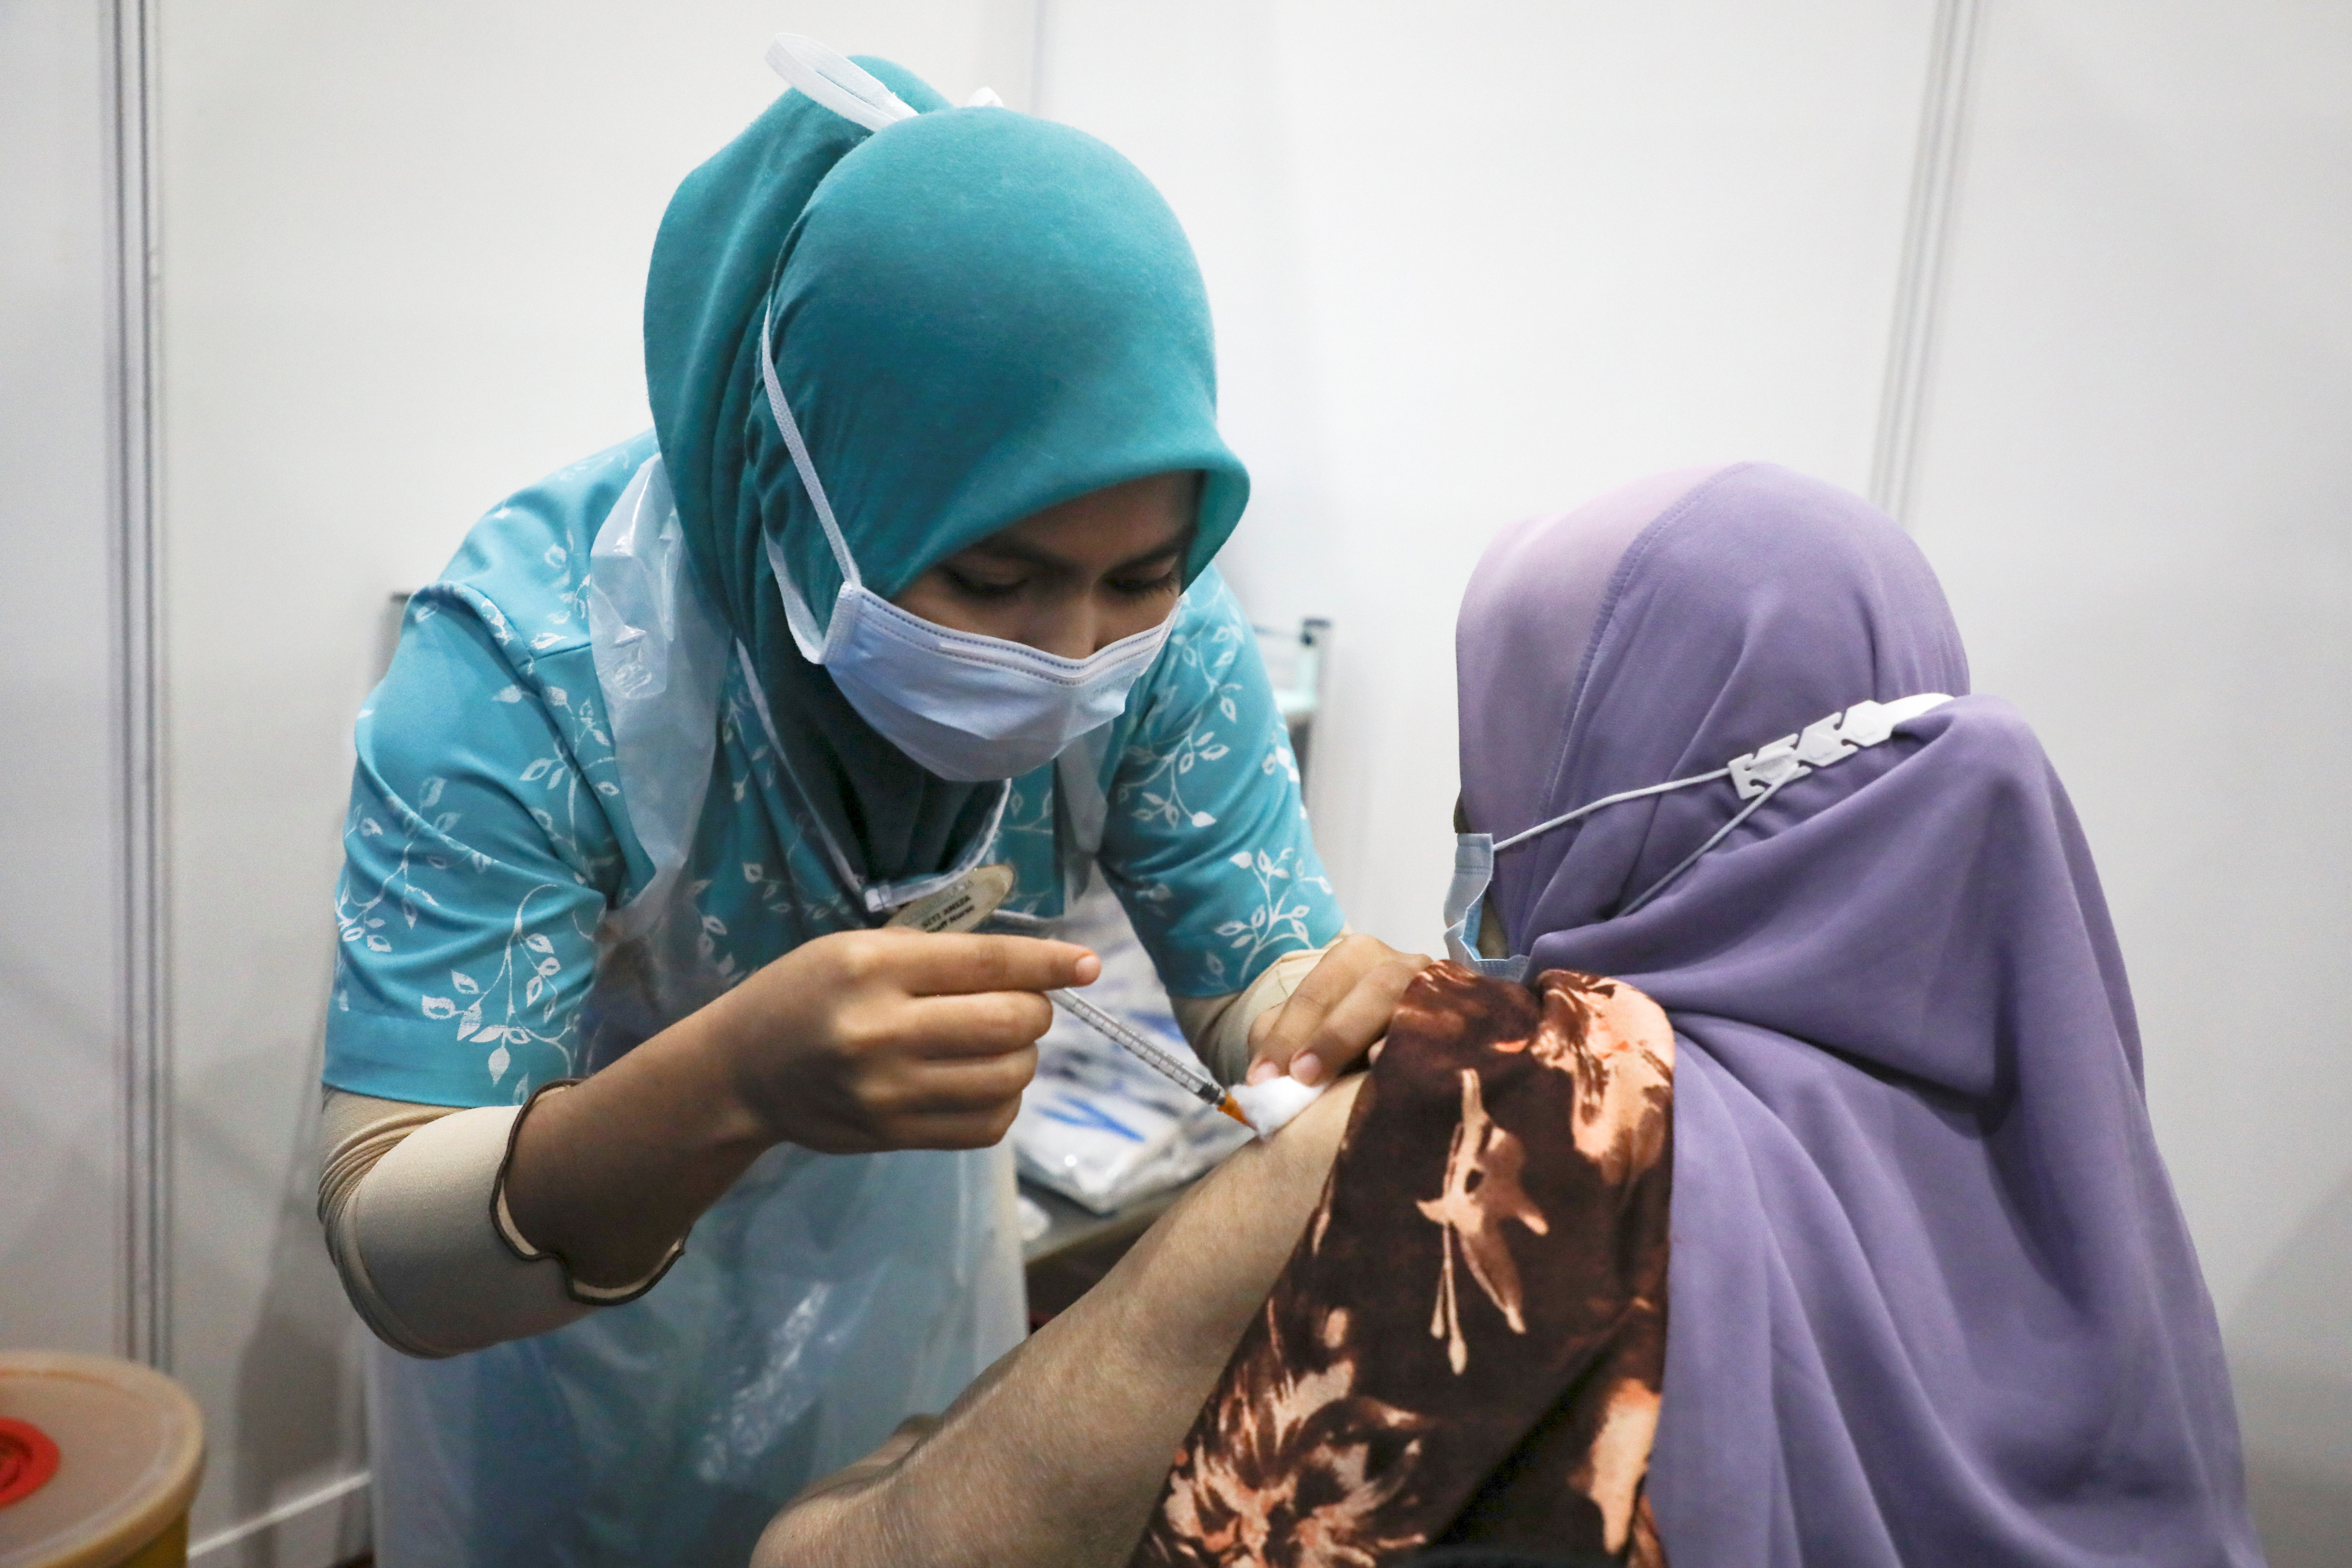 A woman receives a vaccine for the coronavirus disease (COVID-19), at a vaccination centre in Subang Jaya